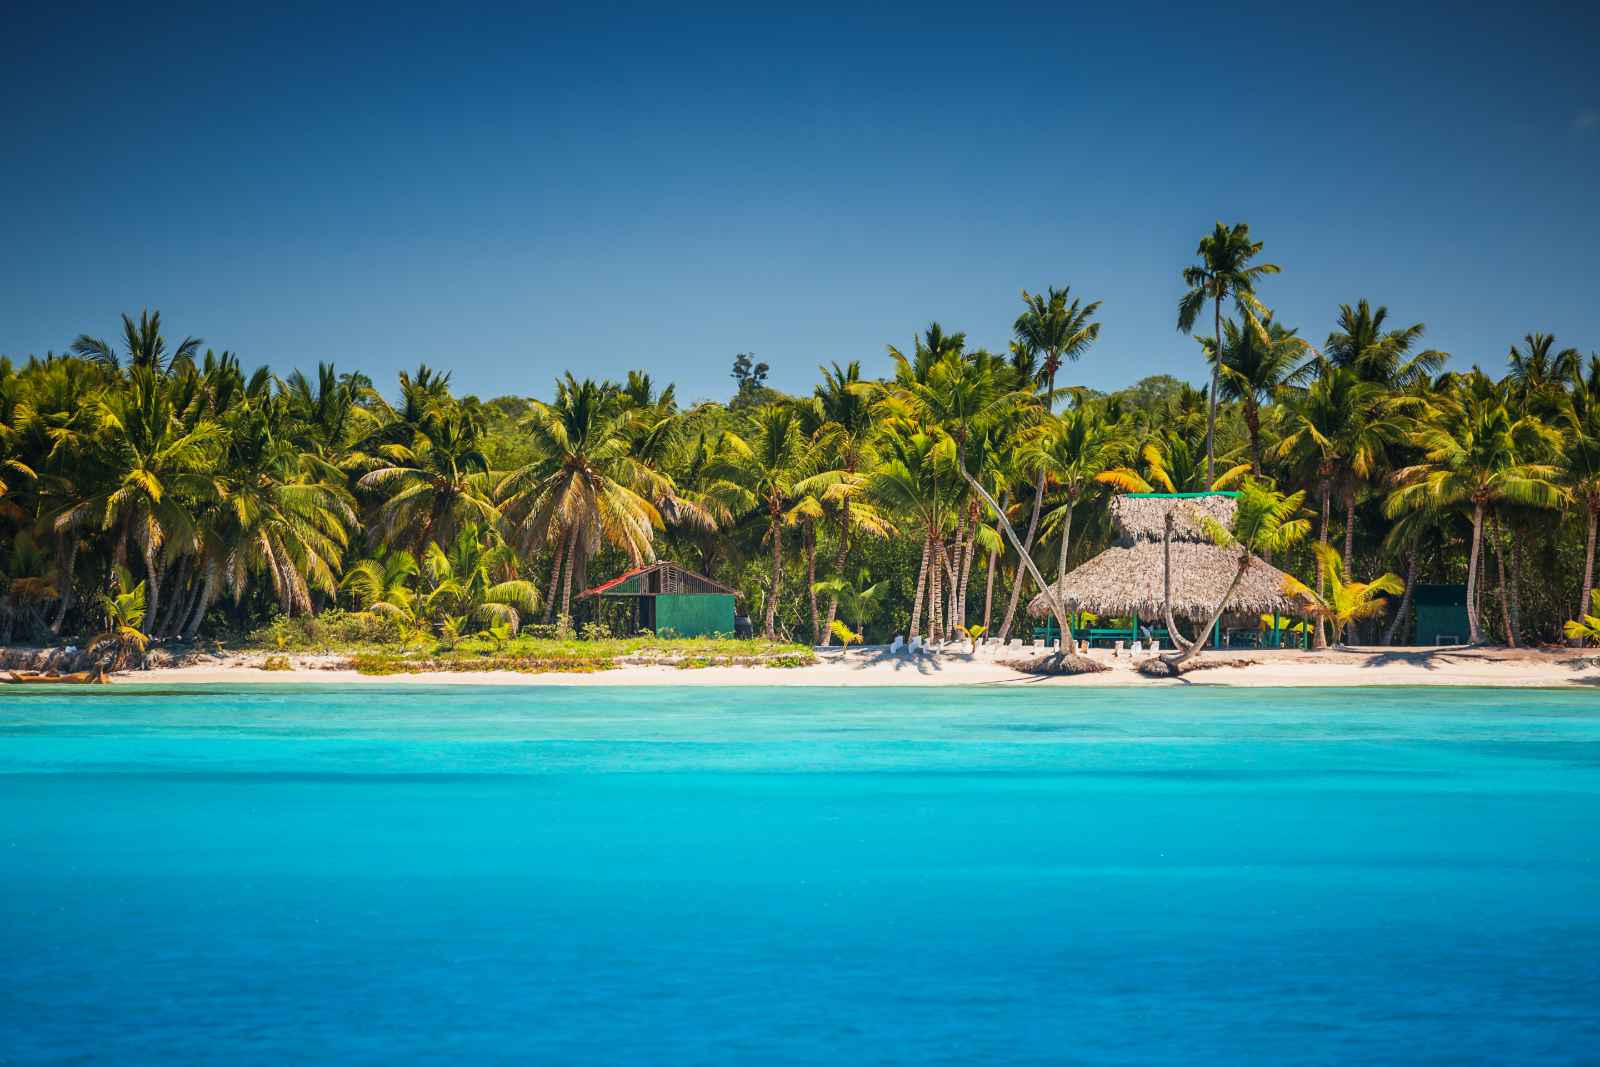 33 Best Things to Do in Punta Cana In 2023